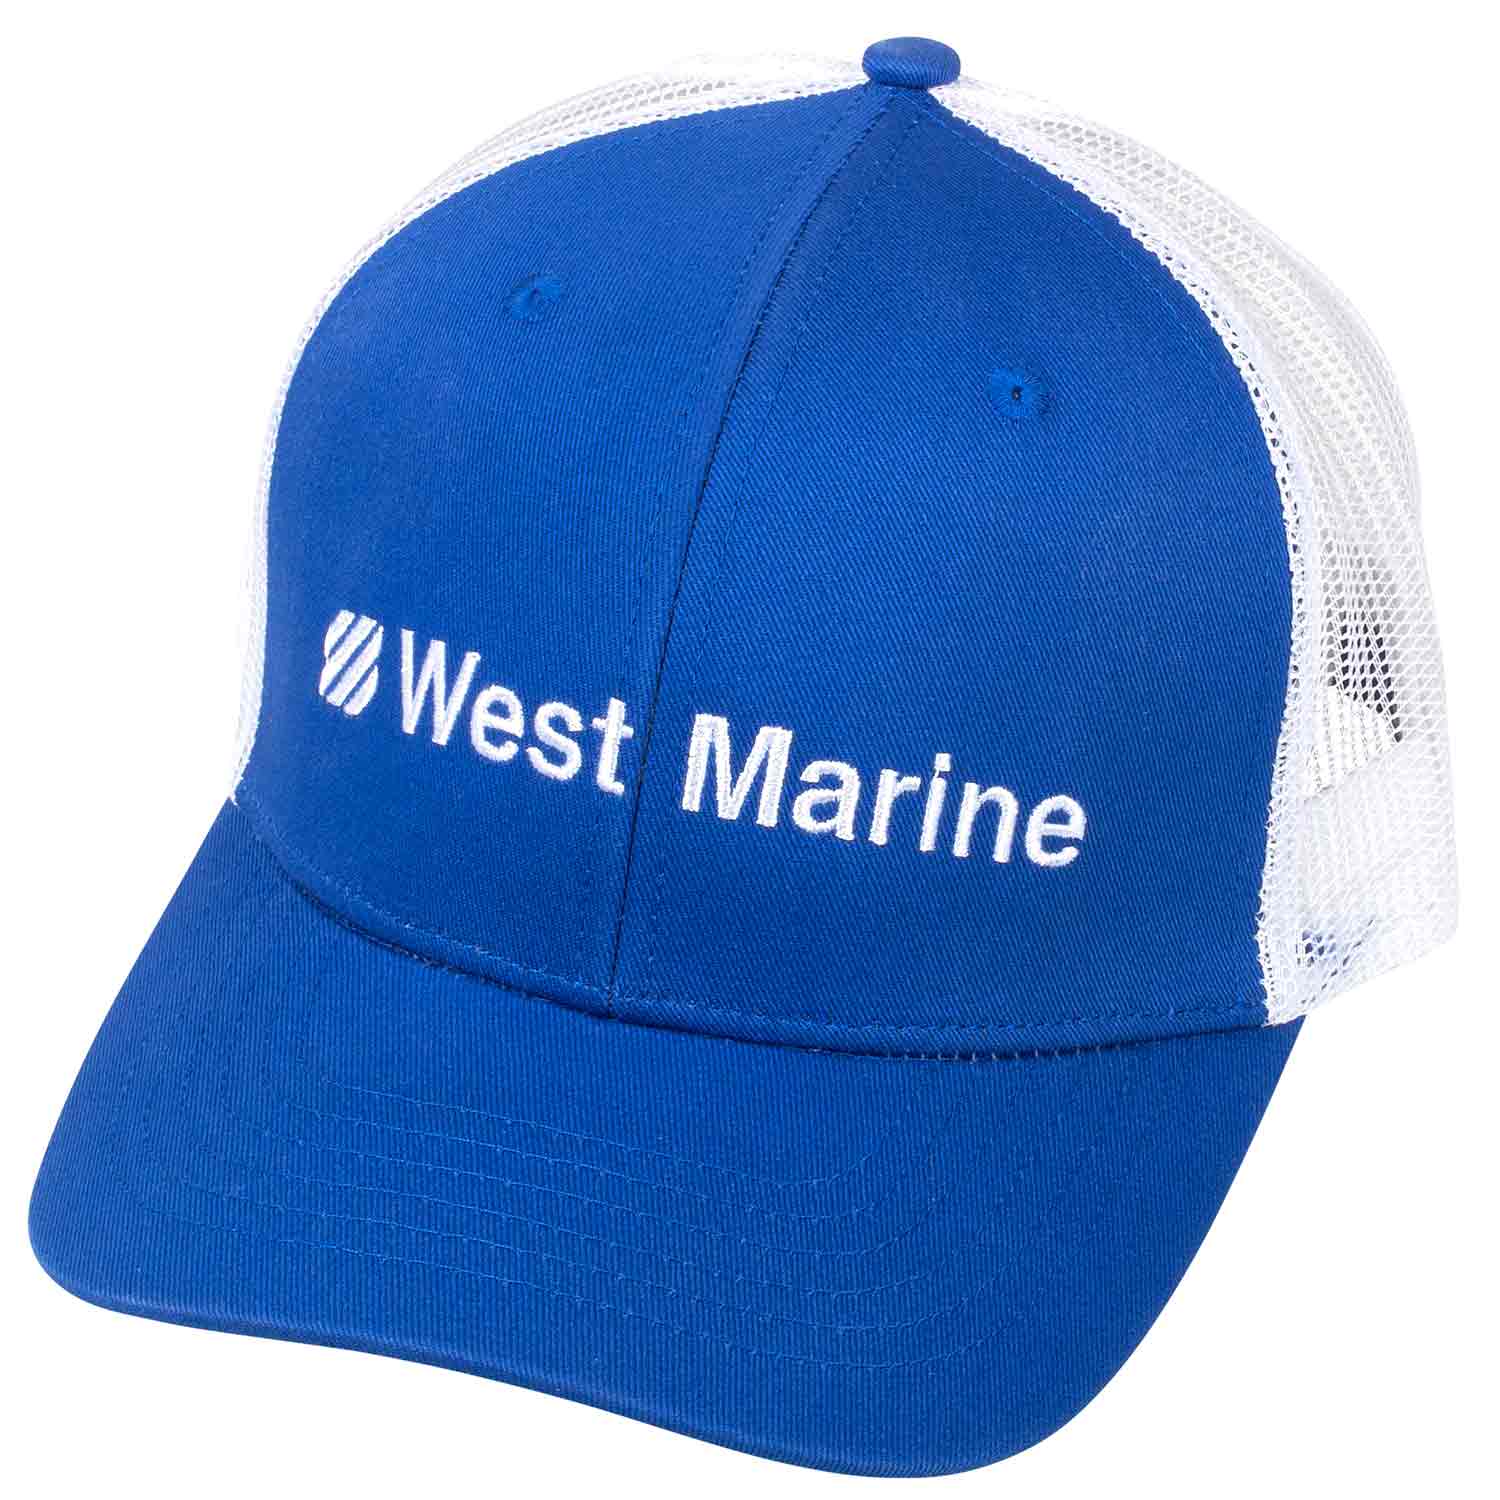 West Marine Brand Trucker Hat Blue | Clothing, Shoes & Accessories at West Marine